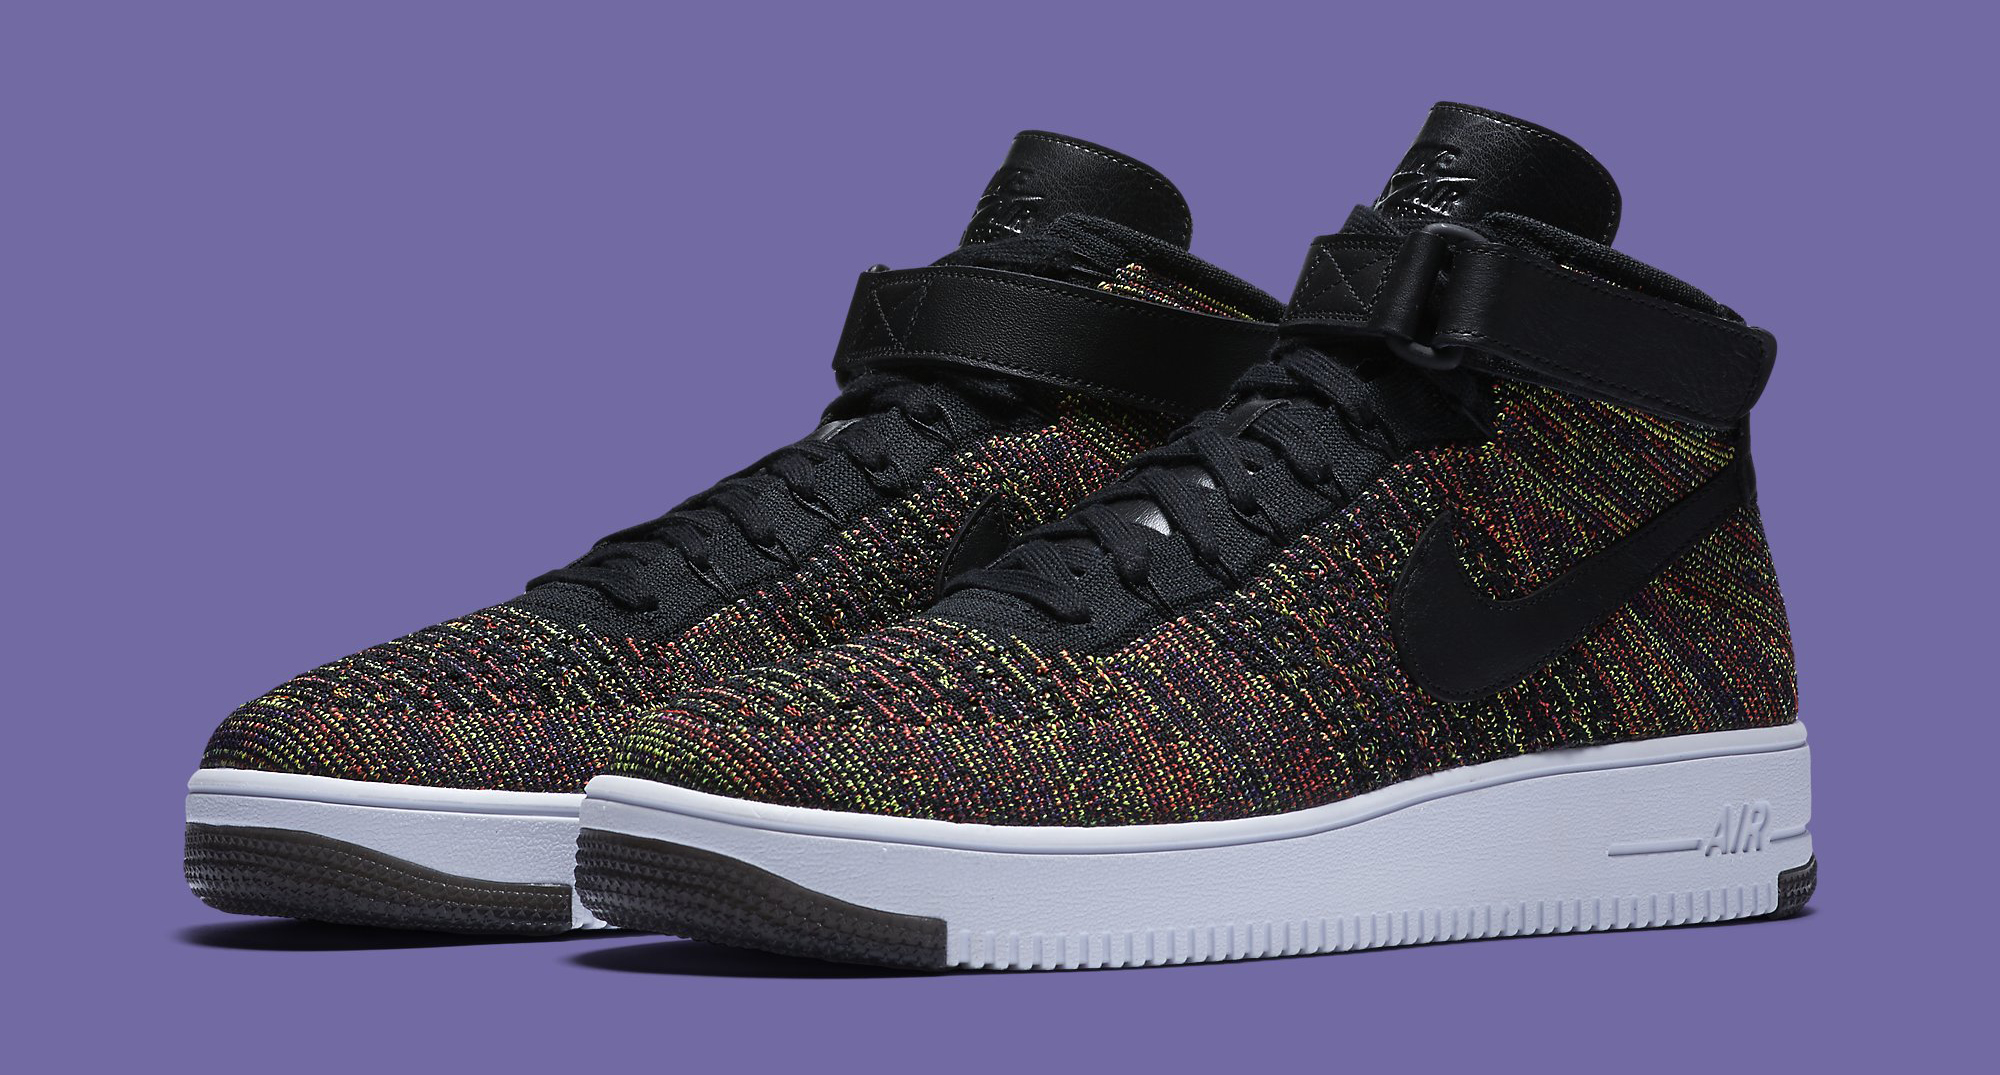 Goma litro acortar More Multicolor Flyknit for Nike's Air Force 1 | Complex